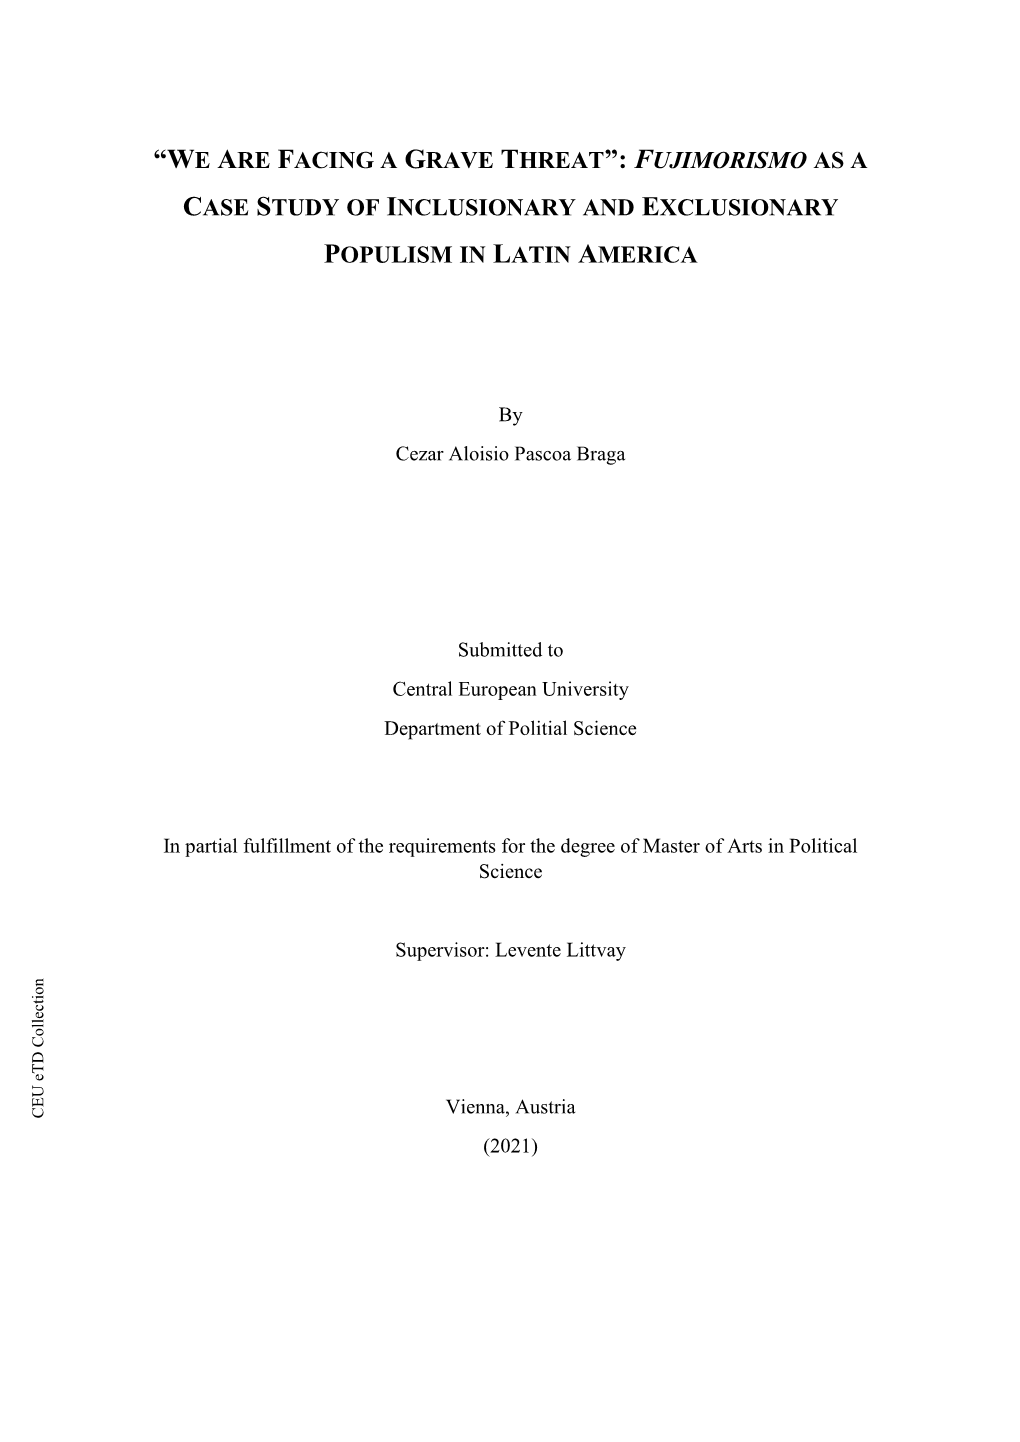 Fujimorismo As a Case Study of Inclusionary and Exclusionary Populism in Latin America